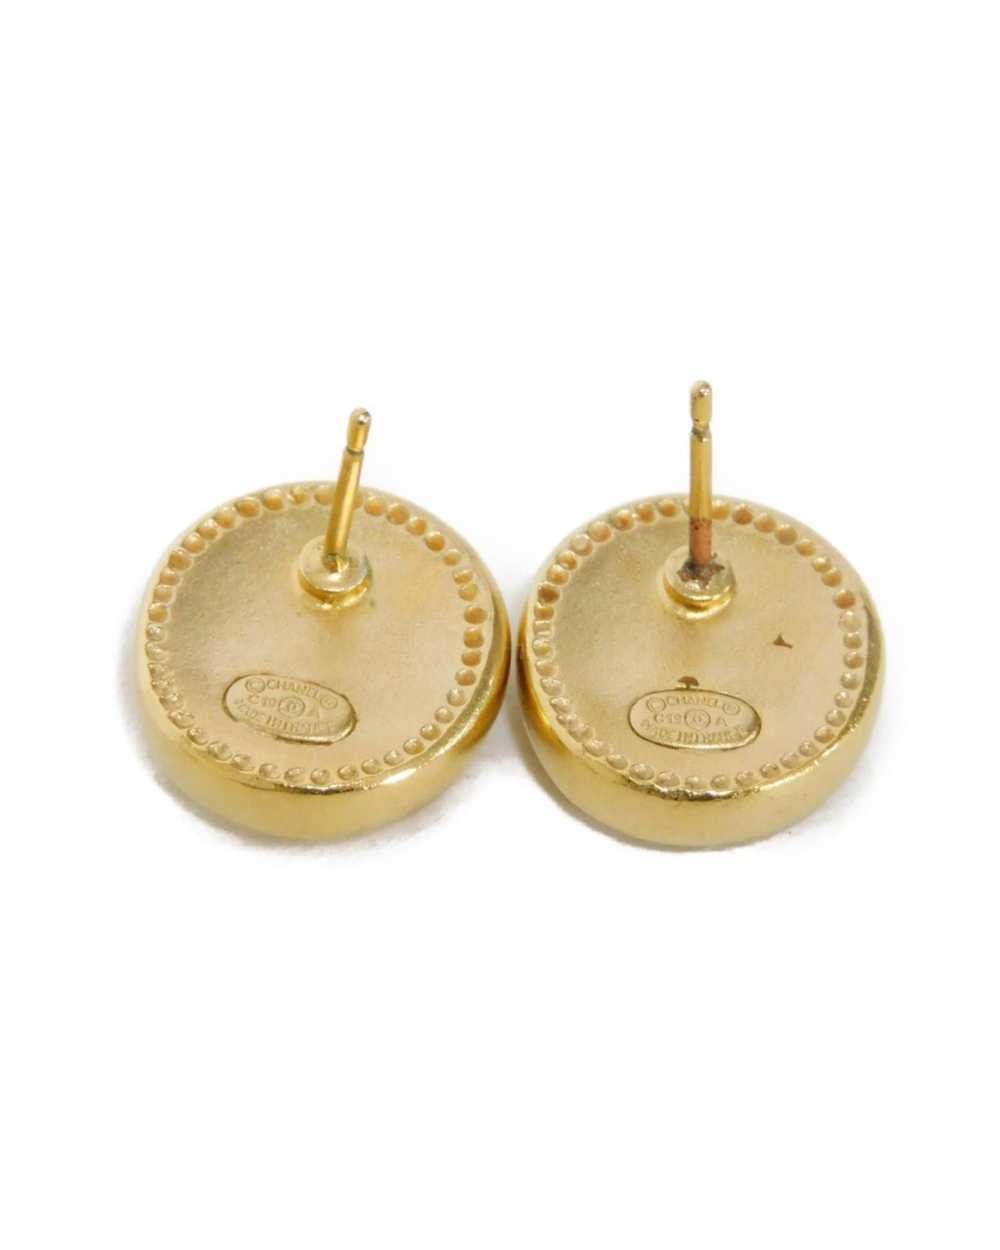 Chanel Champagne Gold Coco Button Earrings - image 8